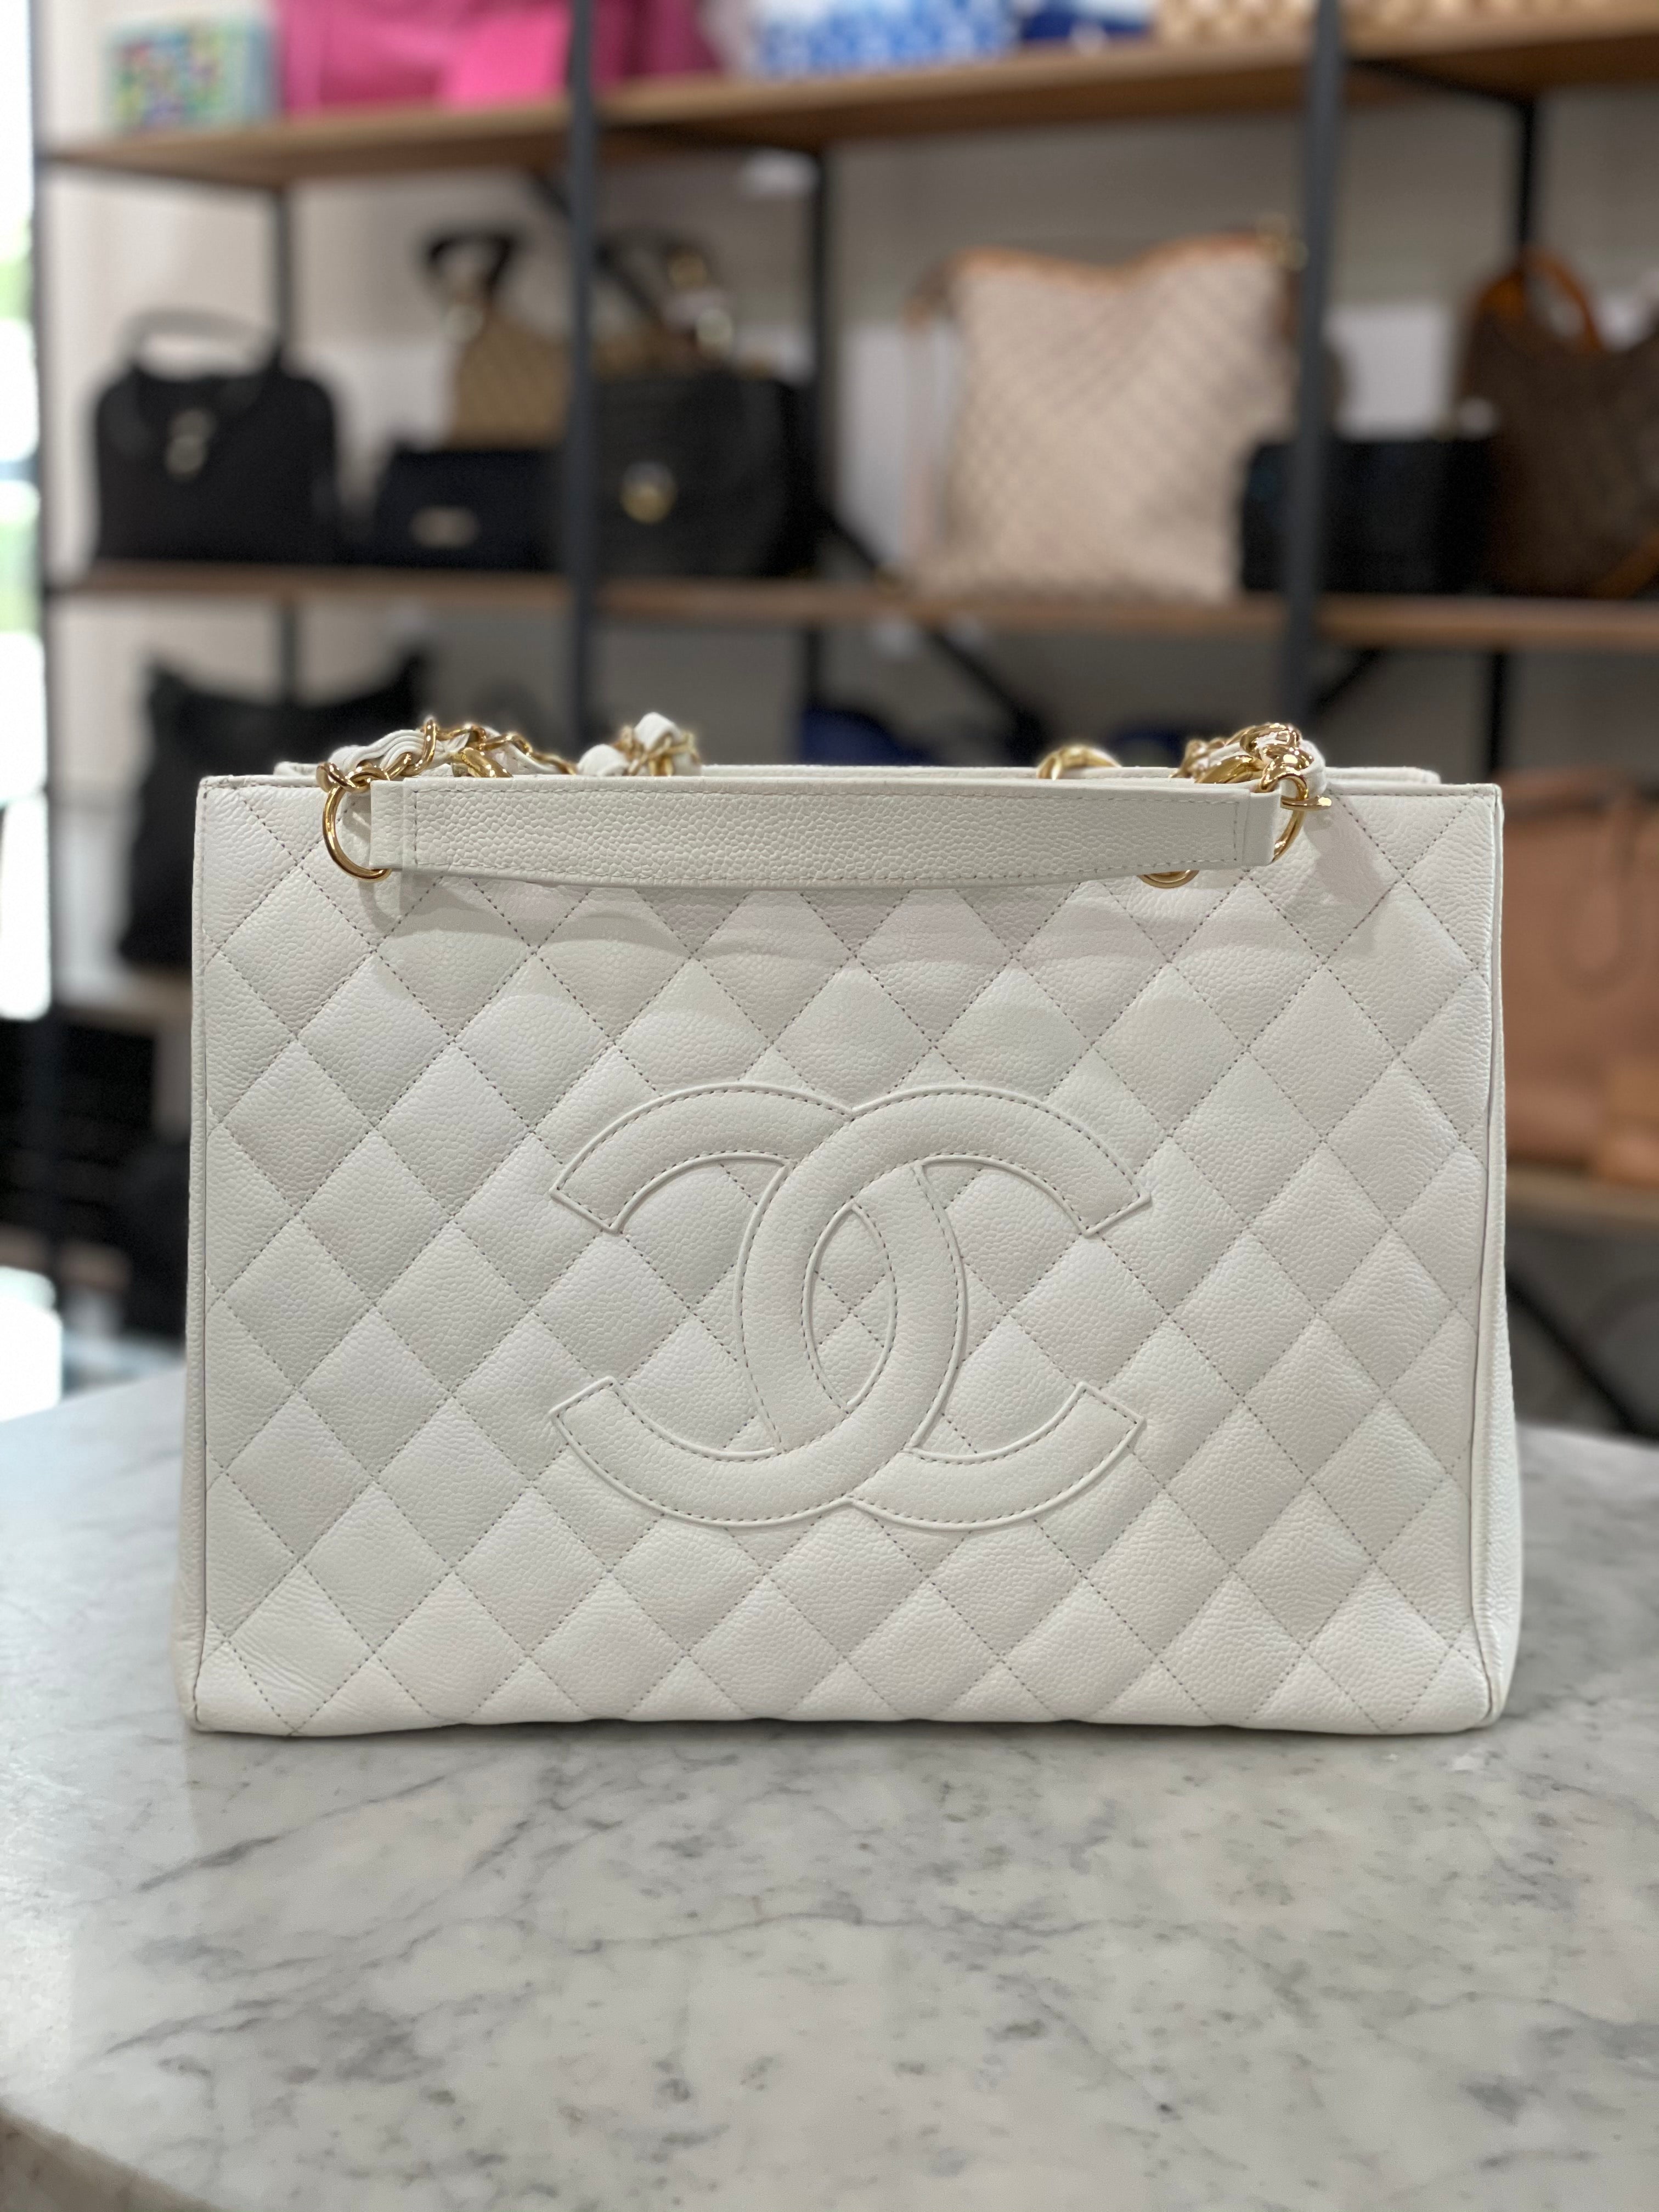 Chanel White Caviar Leather GST Grand Shopping Tote Bag with Gold